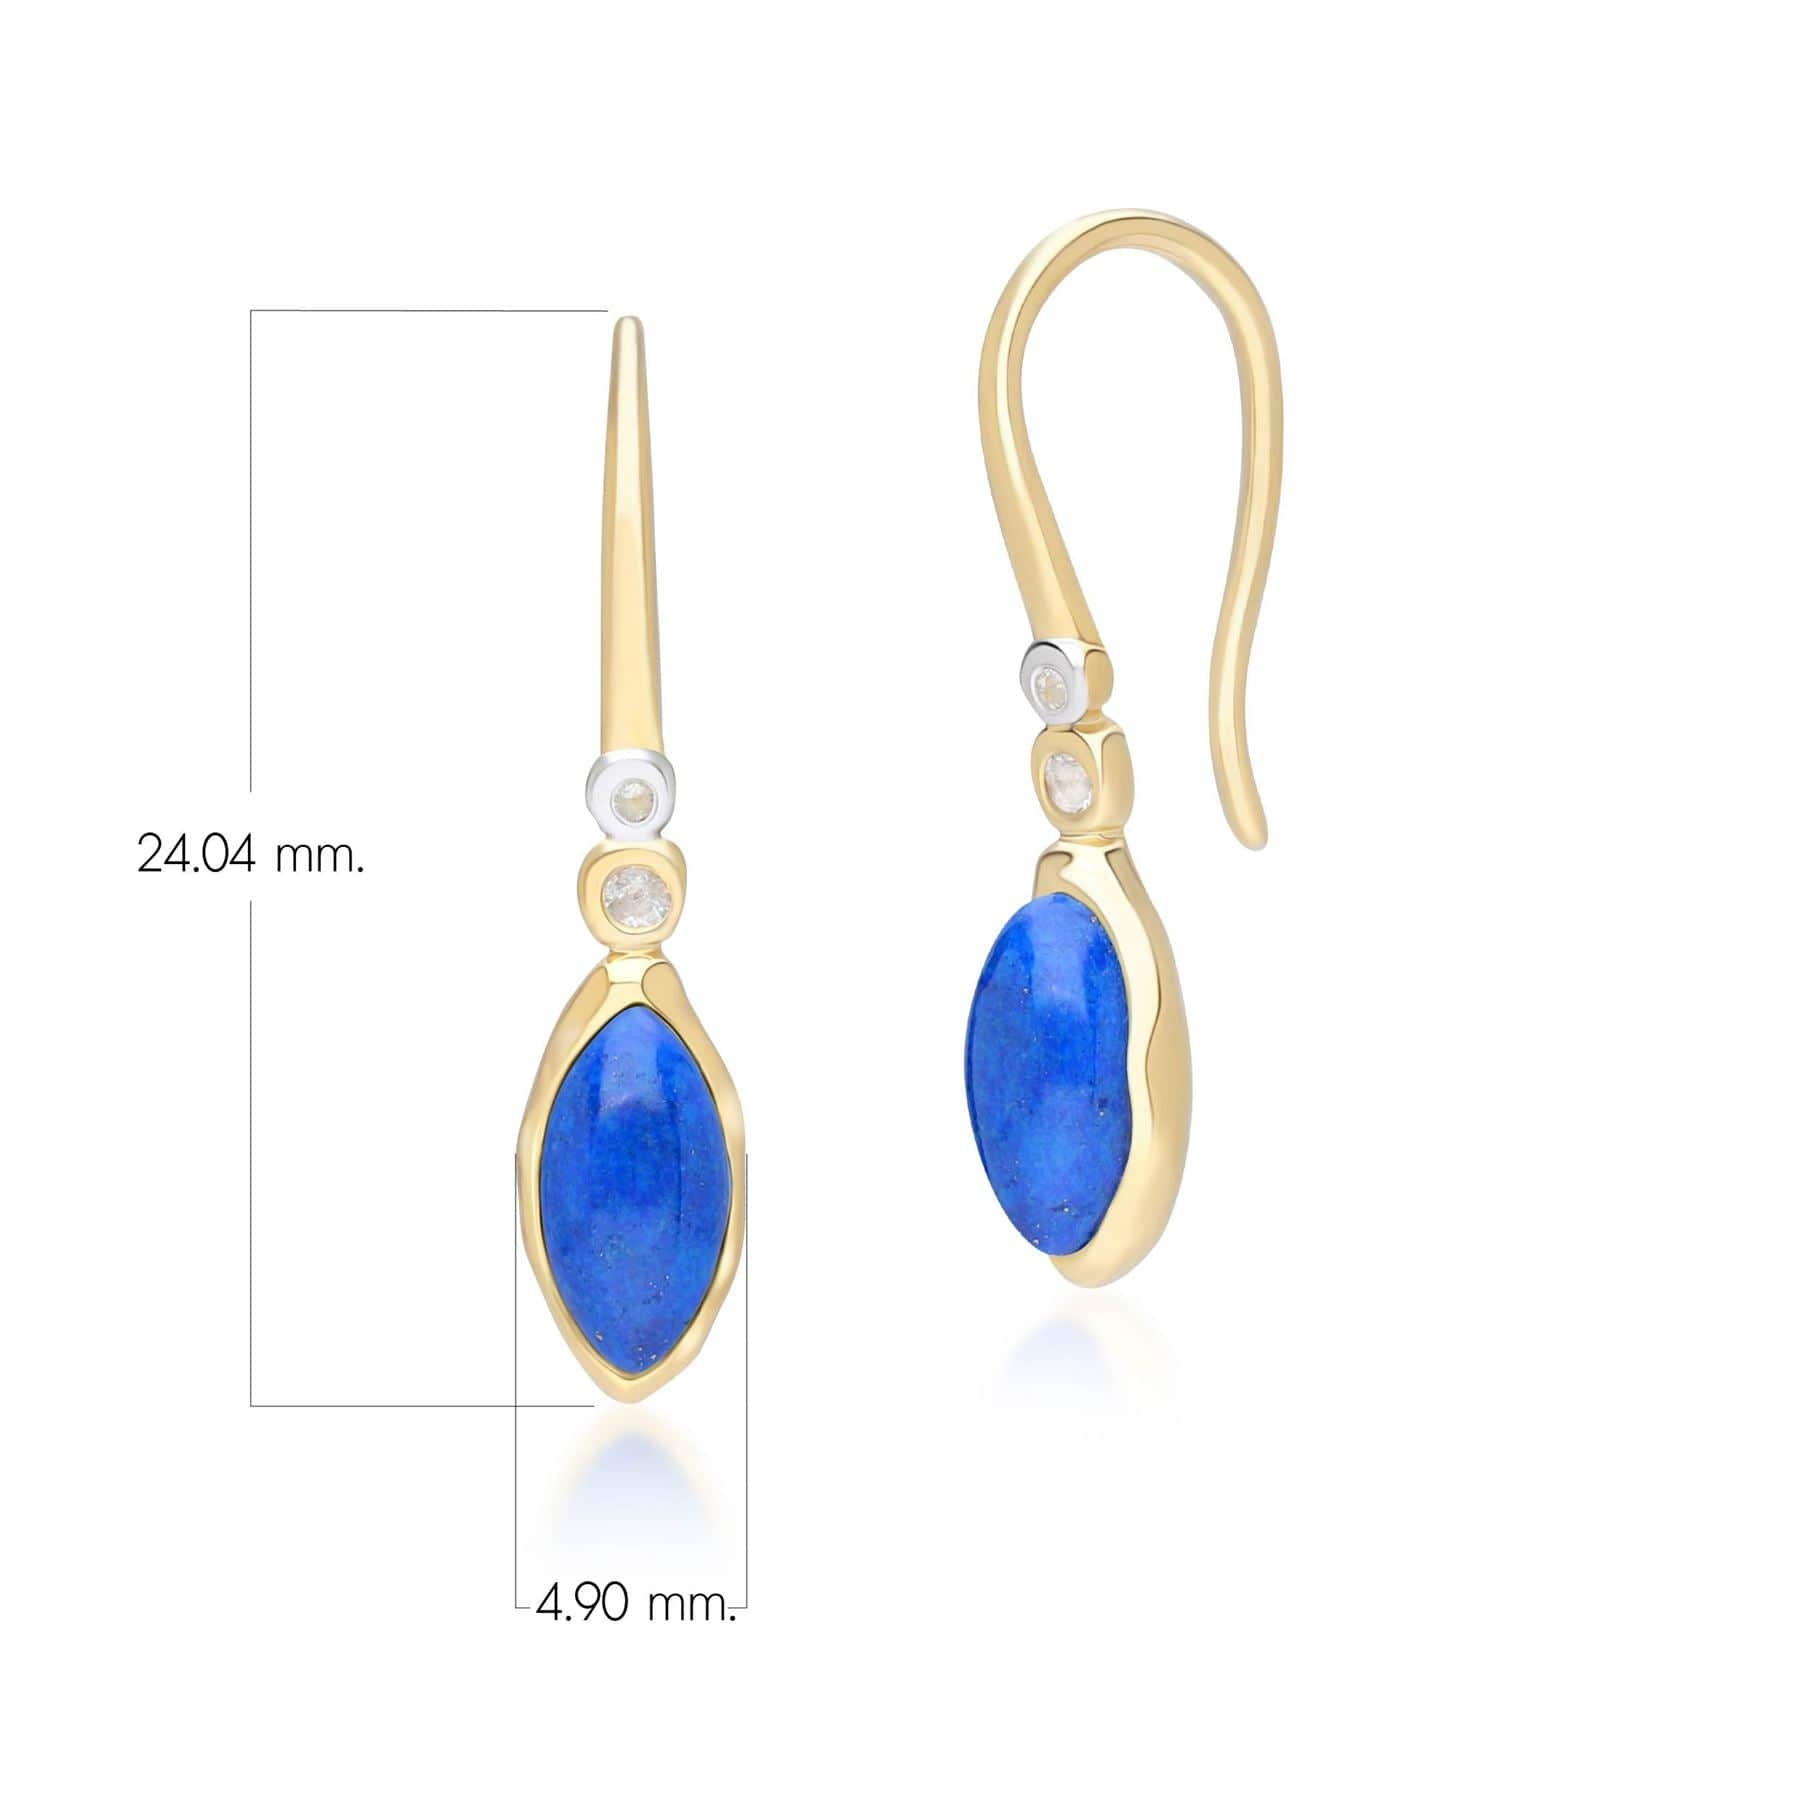 Irregular Marquise Lapis Lazuli & Topaz Drop Earrings In 18ct Gold Plated Sterling Silver